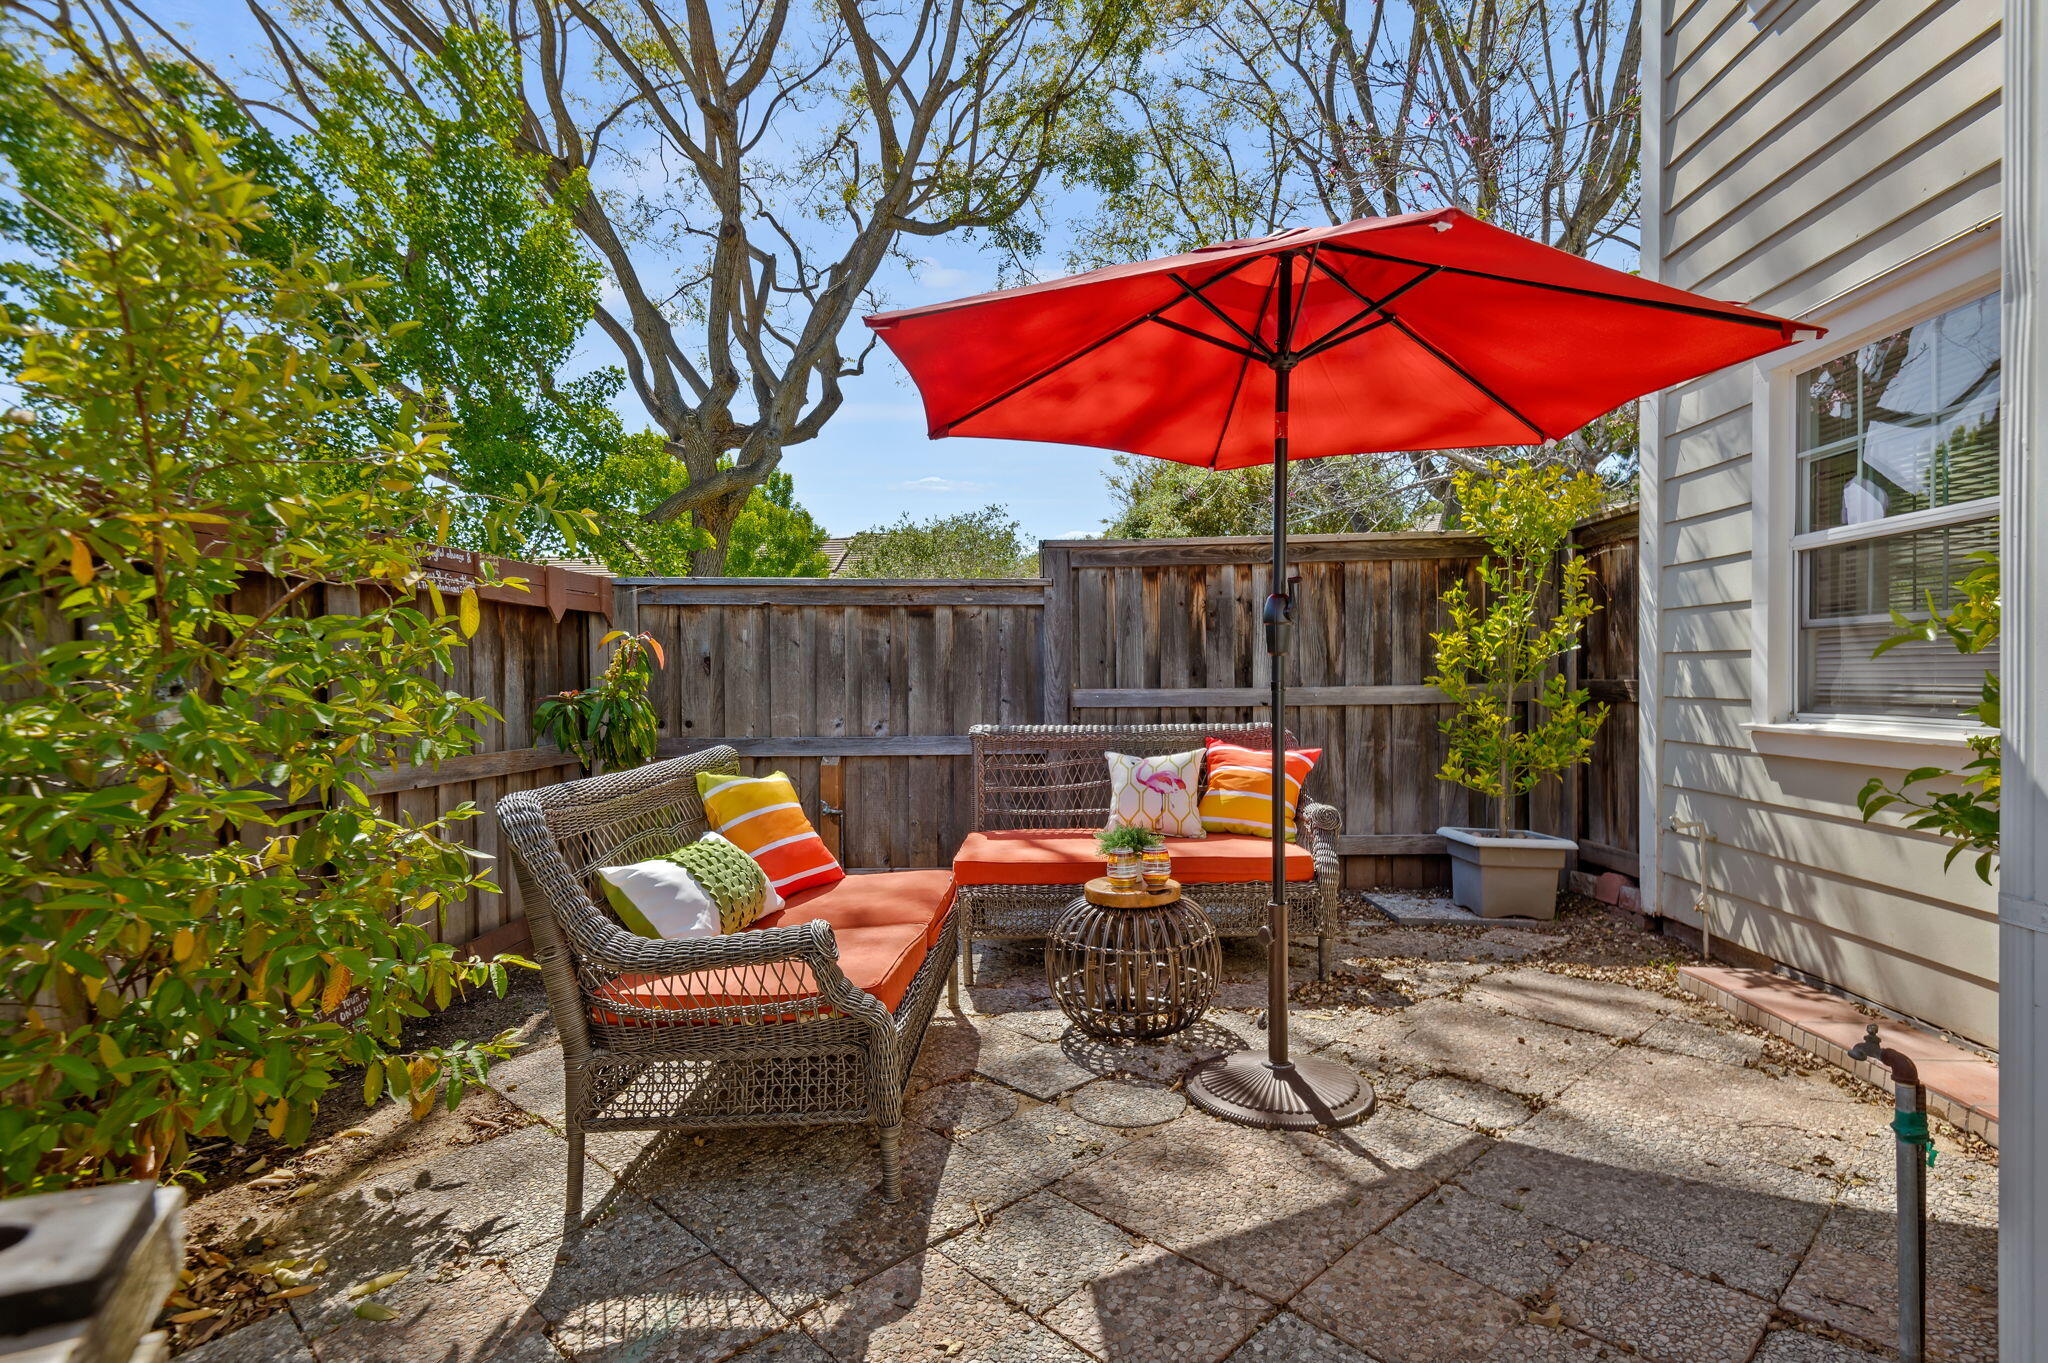 an outdoor sitting area with chairs and table in the patio